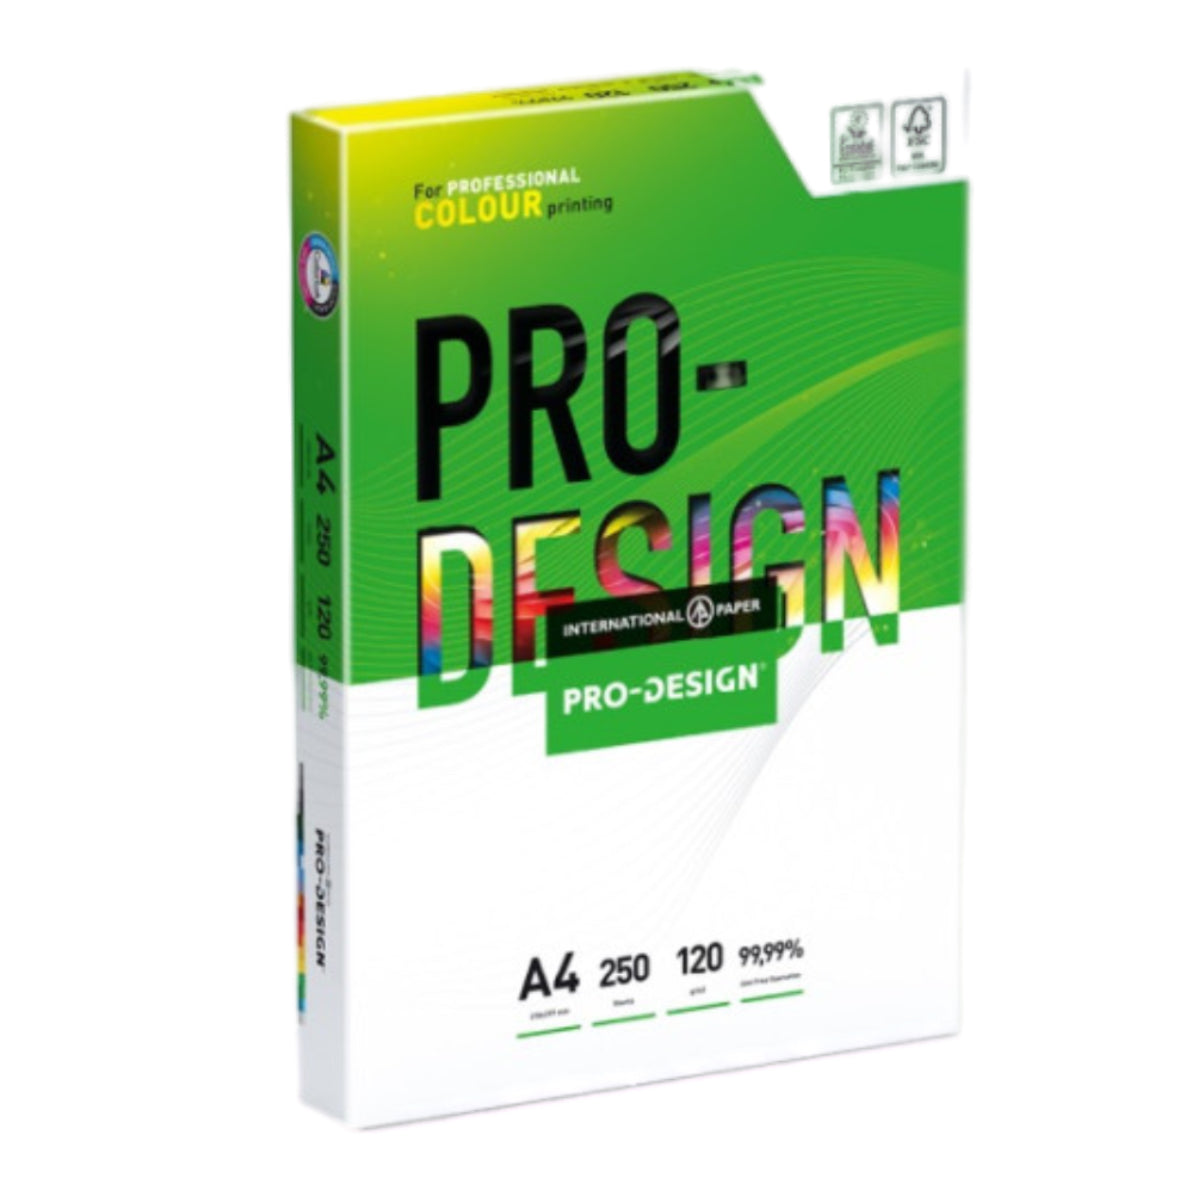 PRO-DESIGN Paper A4, 120gsm, 250sheets/pack, White